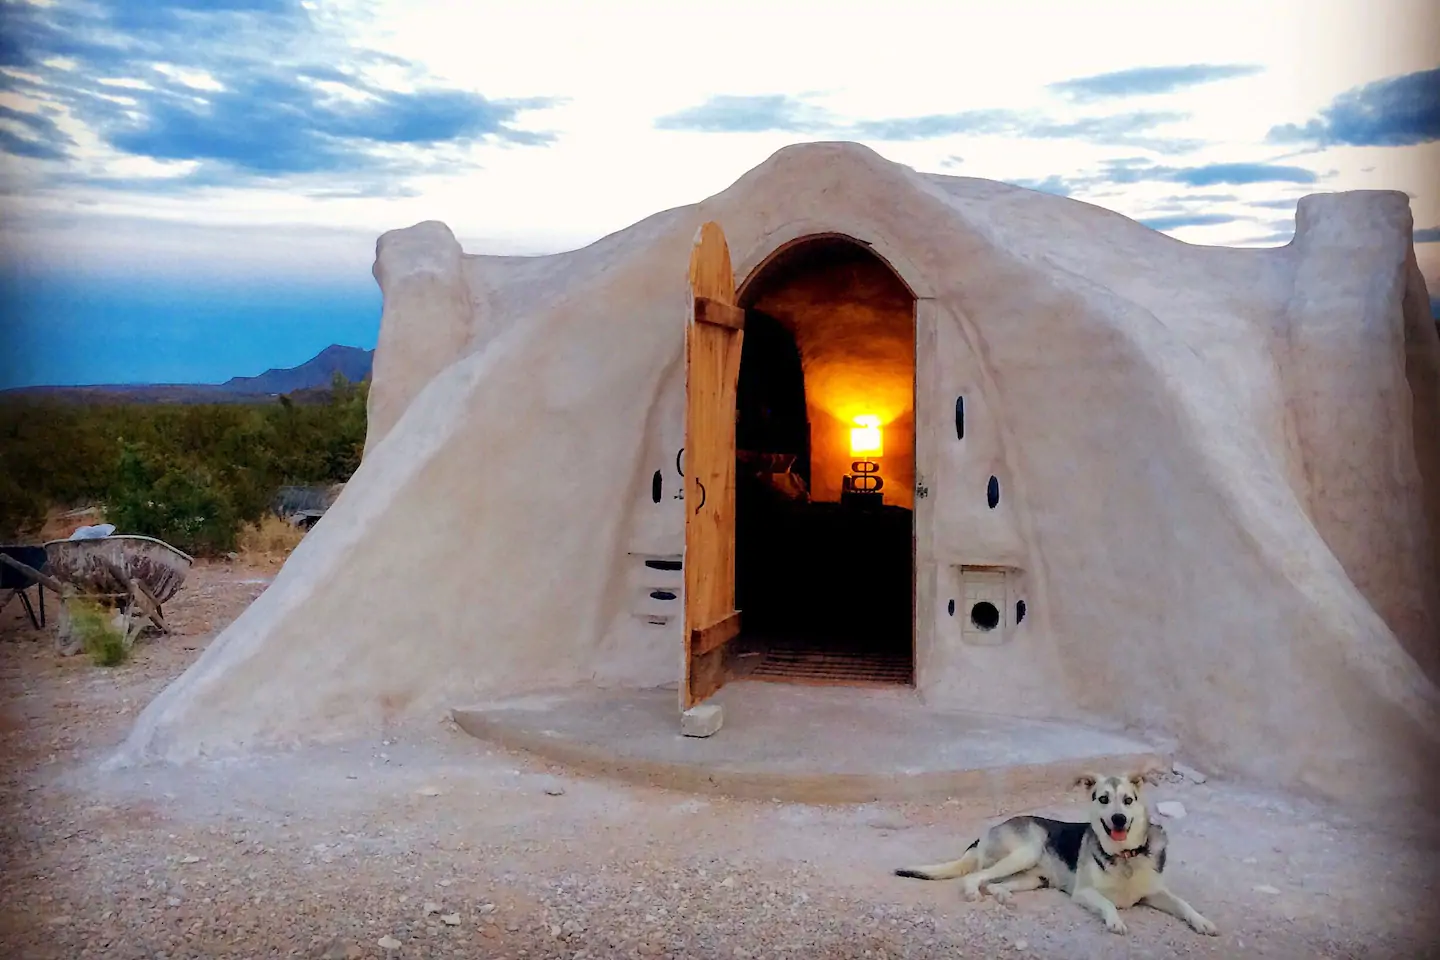 A khaki-colored dome building has a door open, leading to a room. A dog sits outside the home.